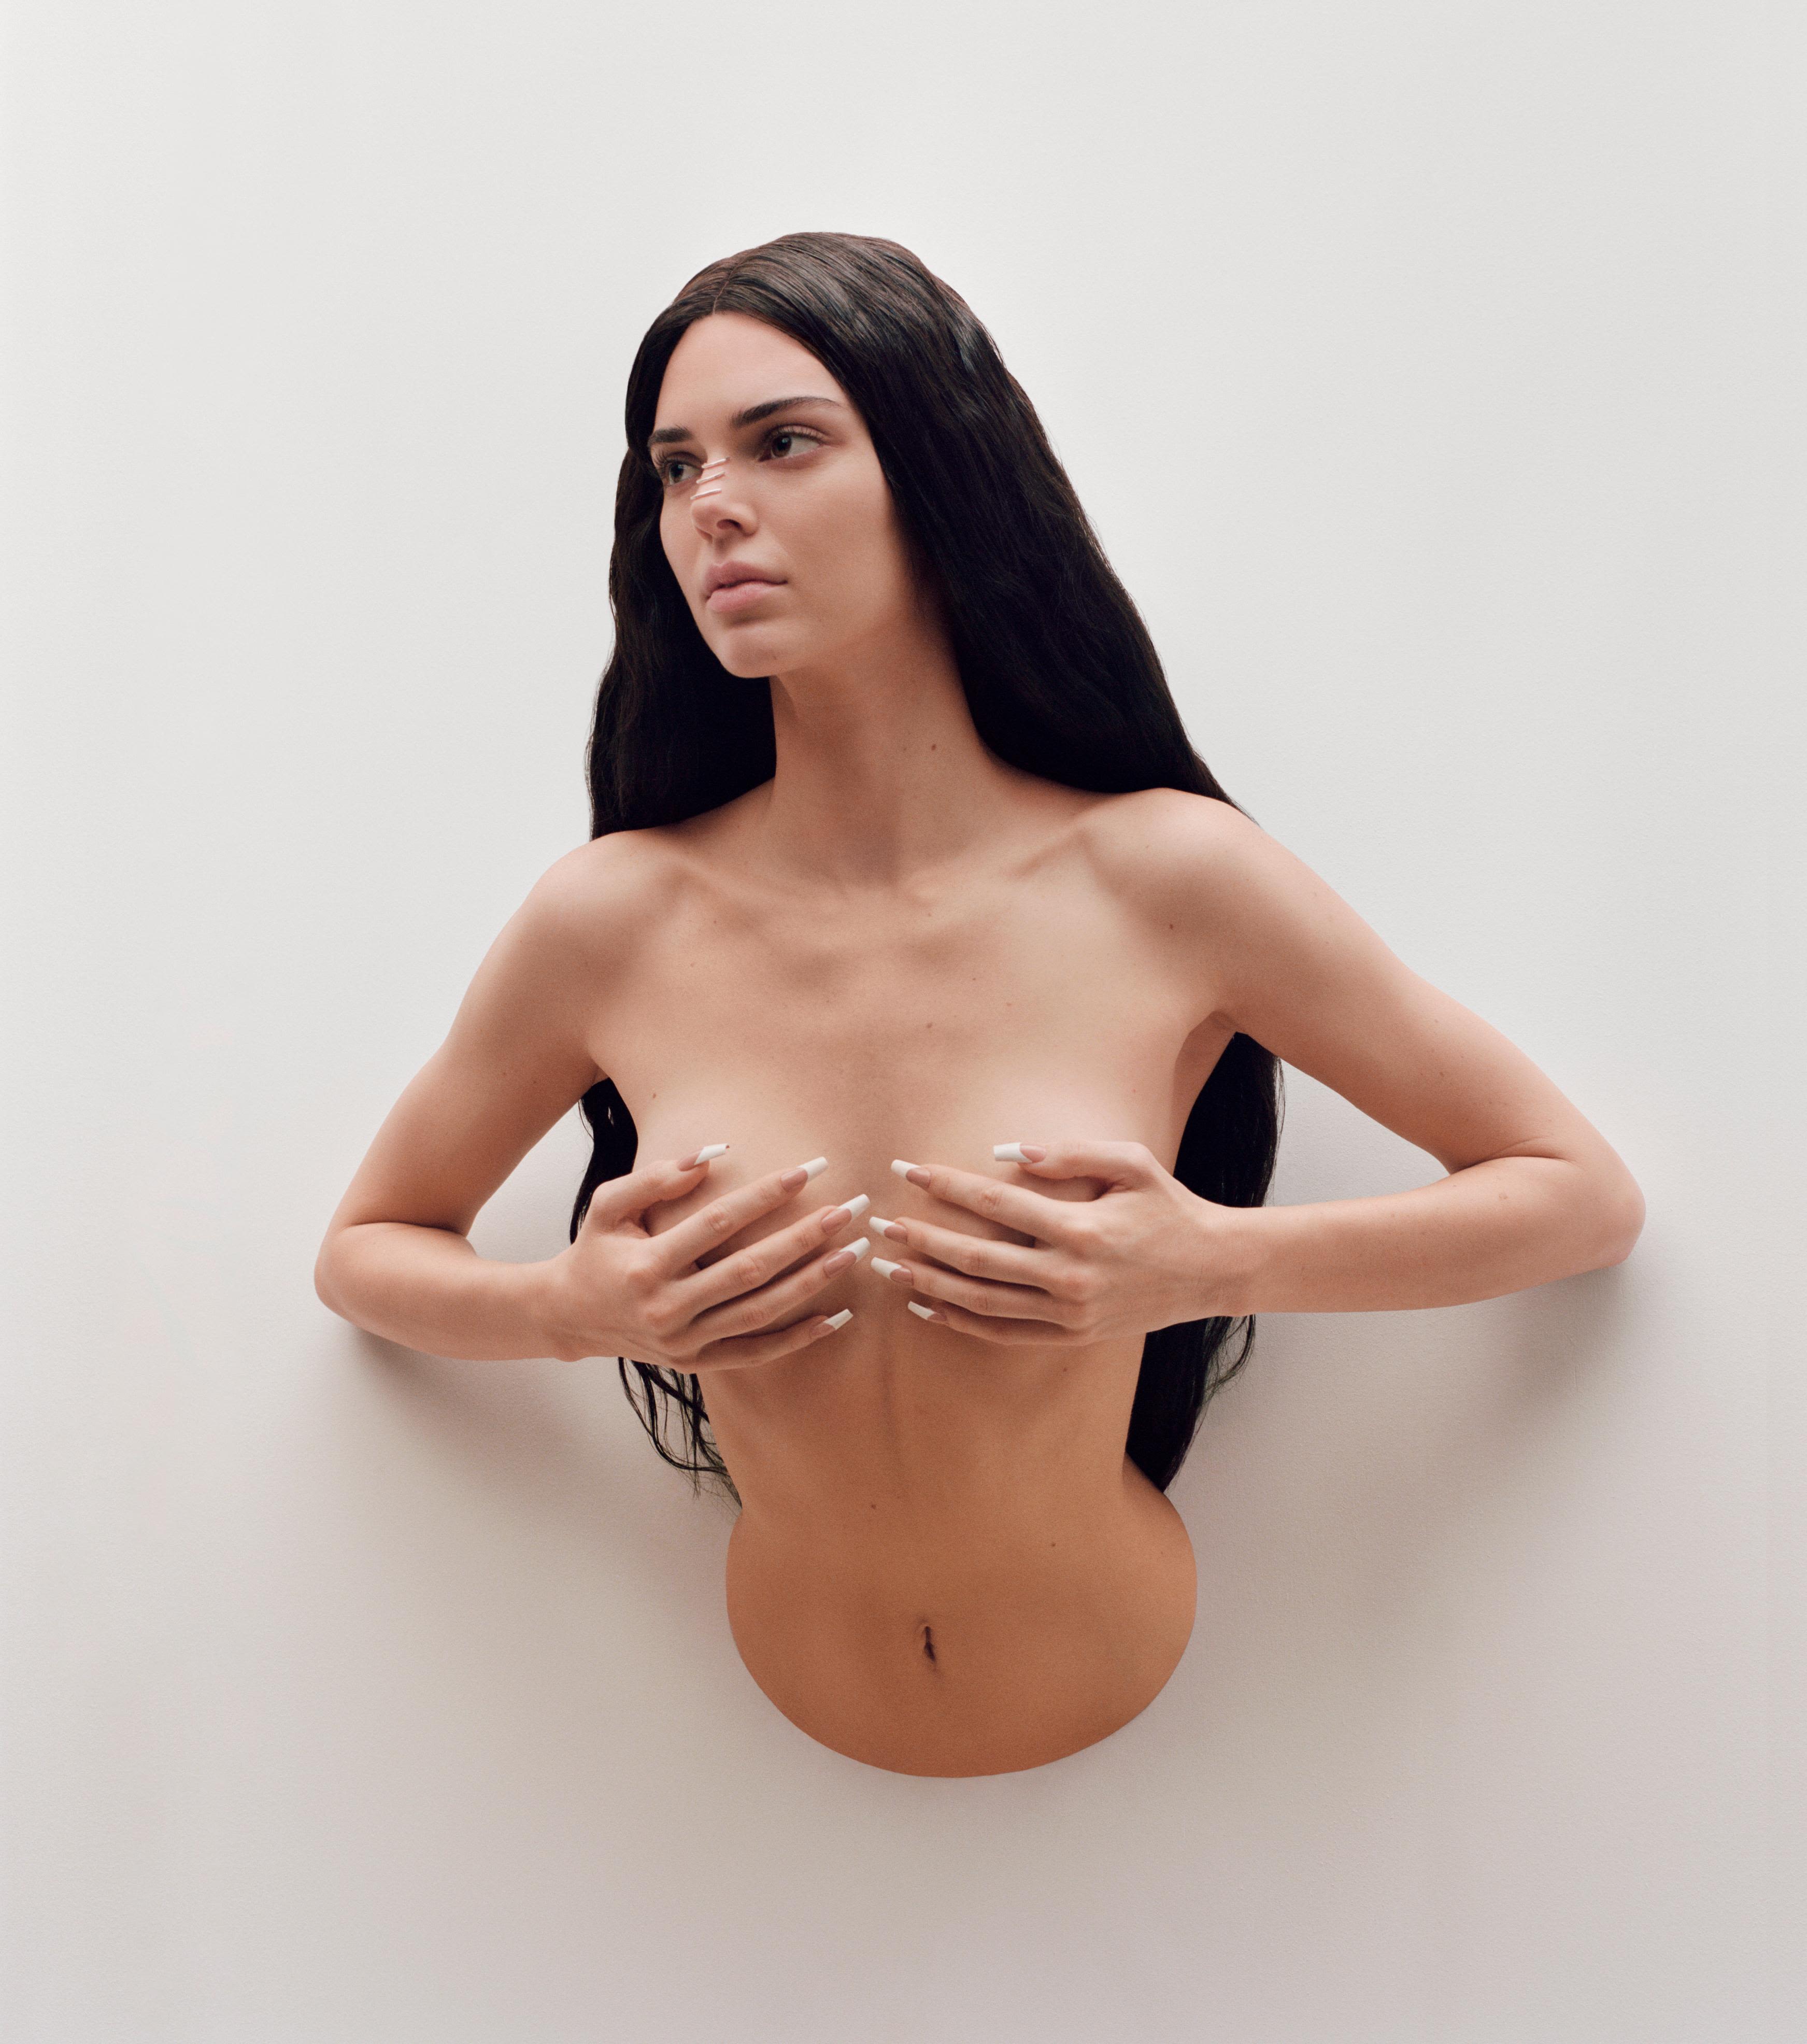 Kendall Jenner - Kendall Jenner photographed as topless wax model by banana art provocateur  | CNN